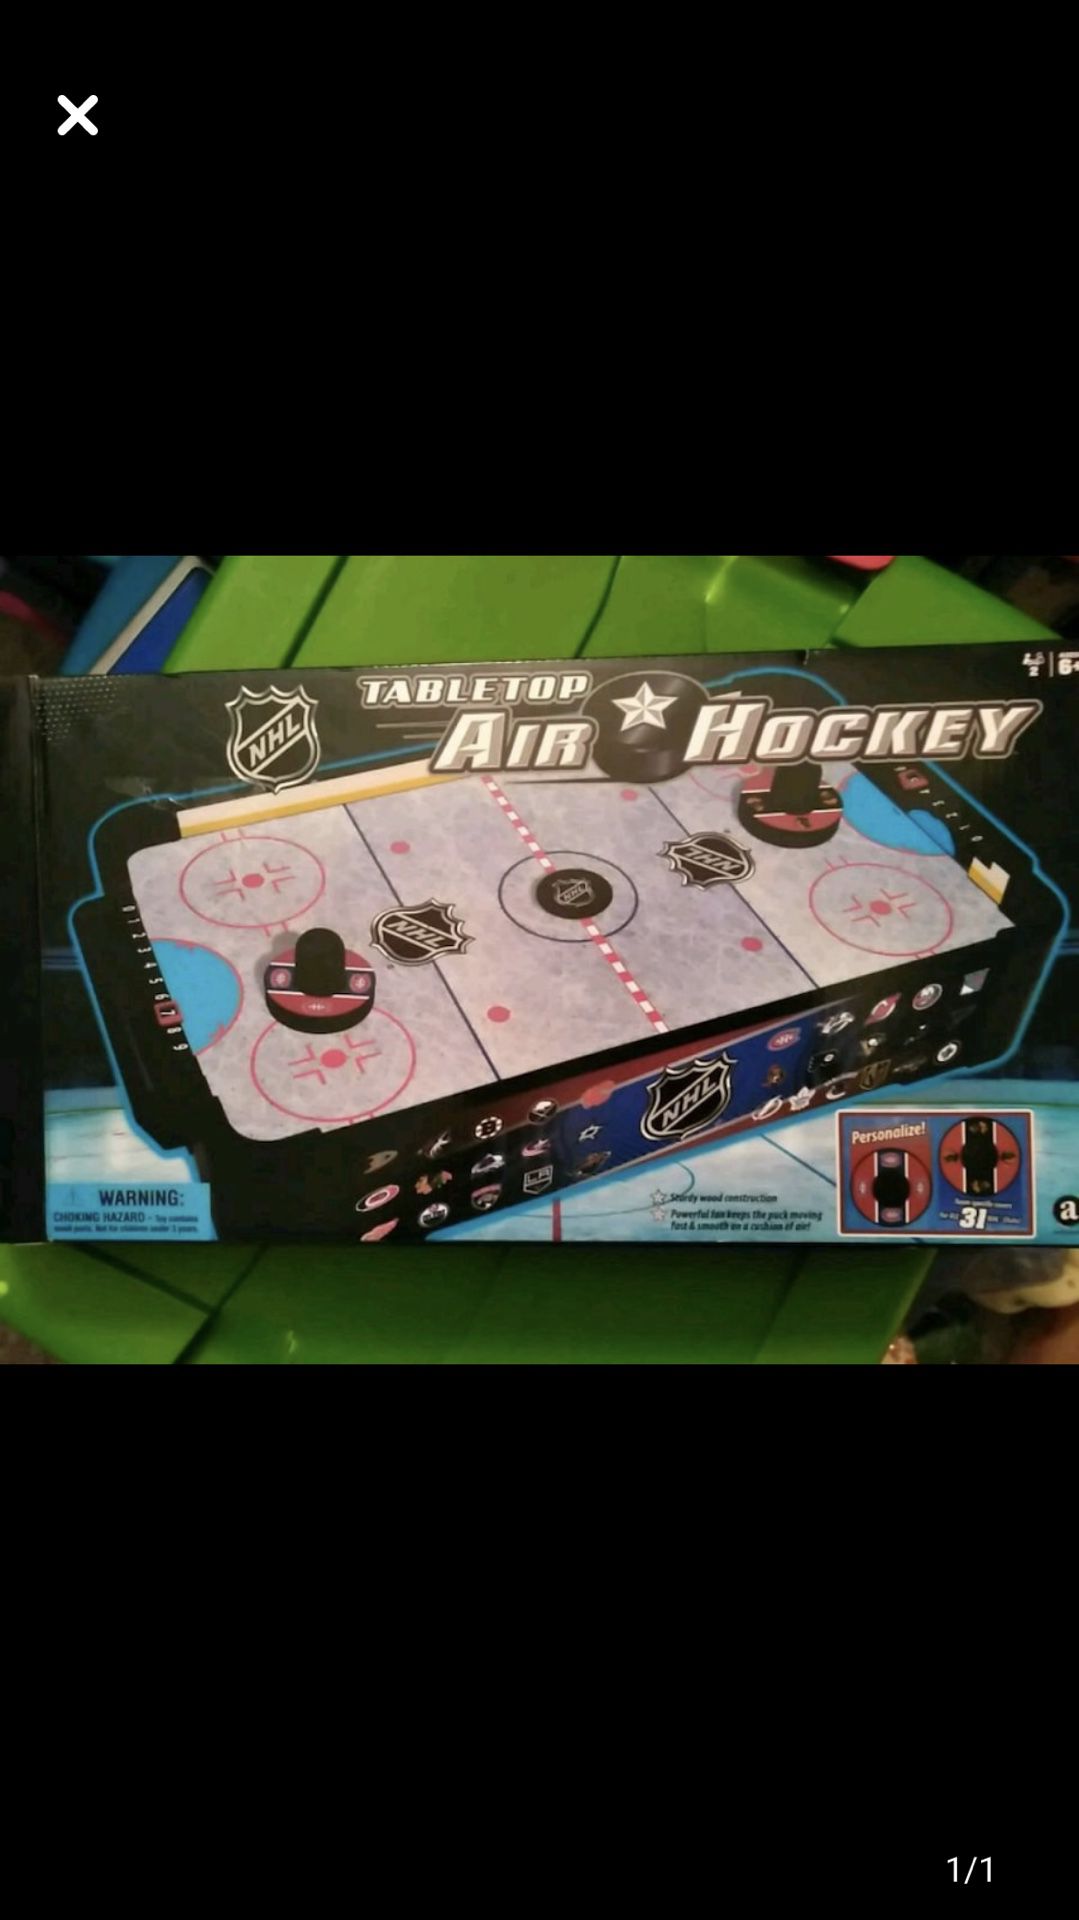 Kids NHL TableTop Air Hockey 2 Players 16” by 9” table top game